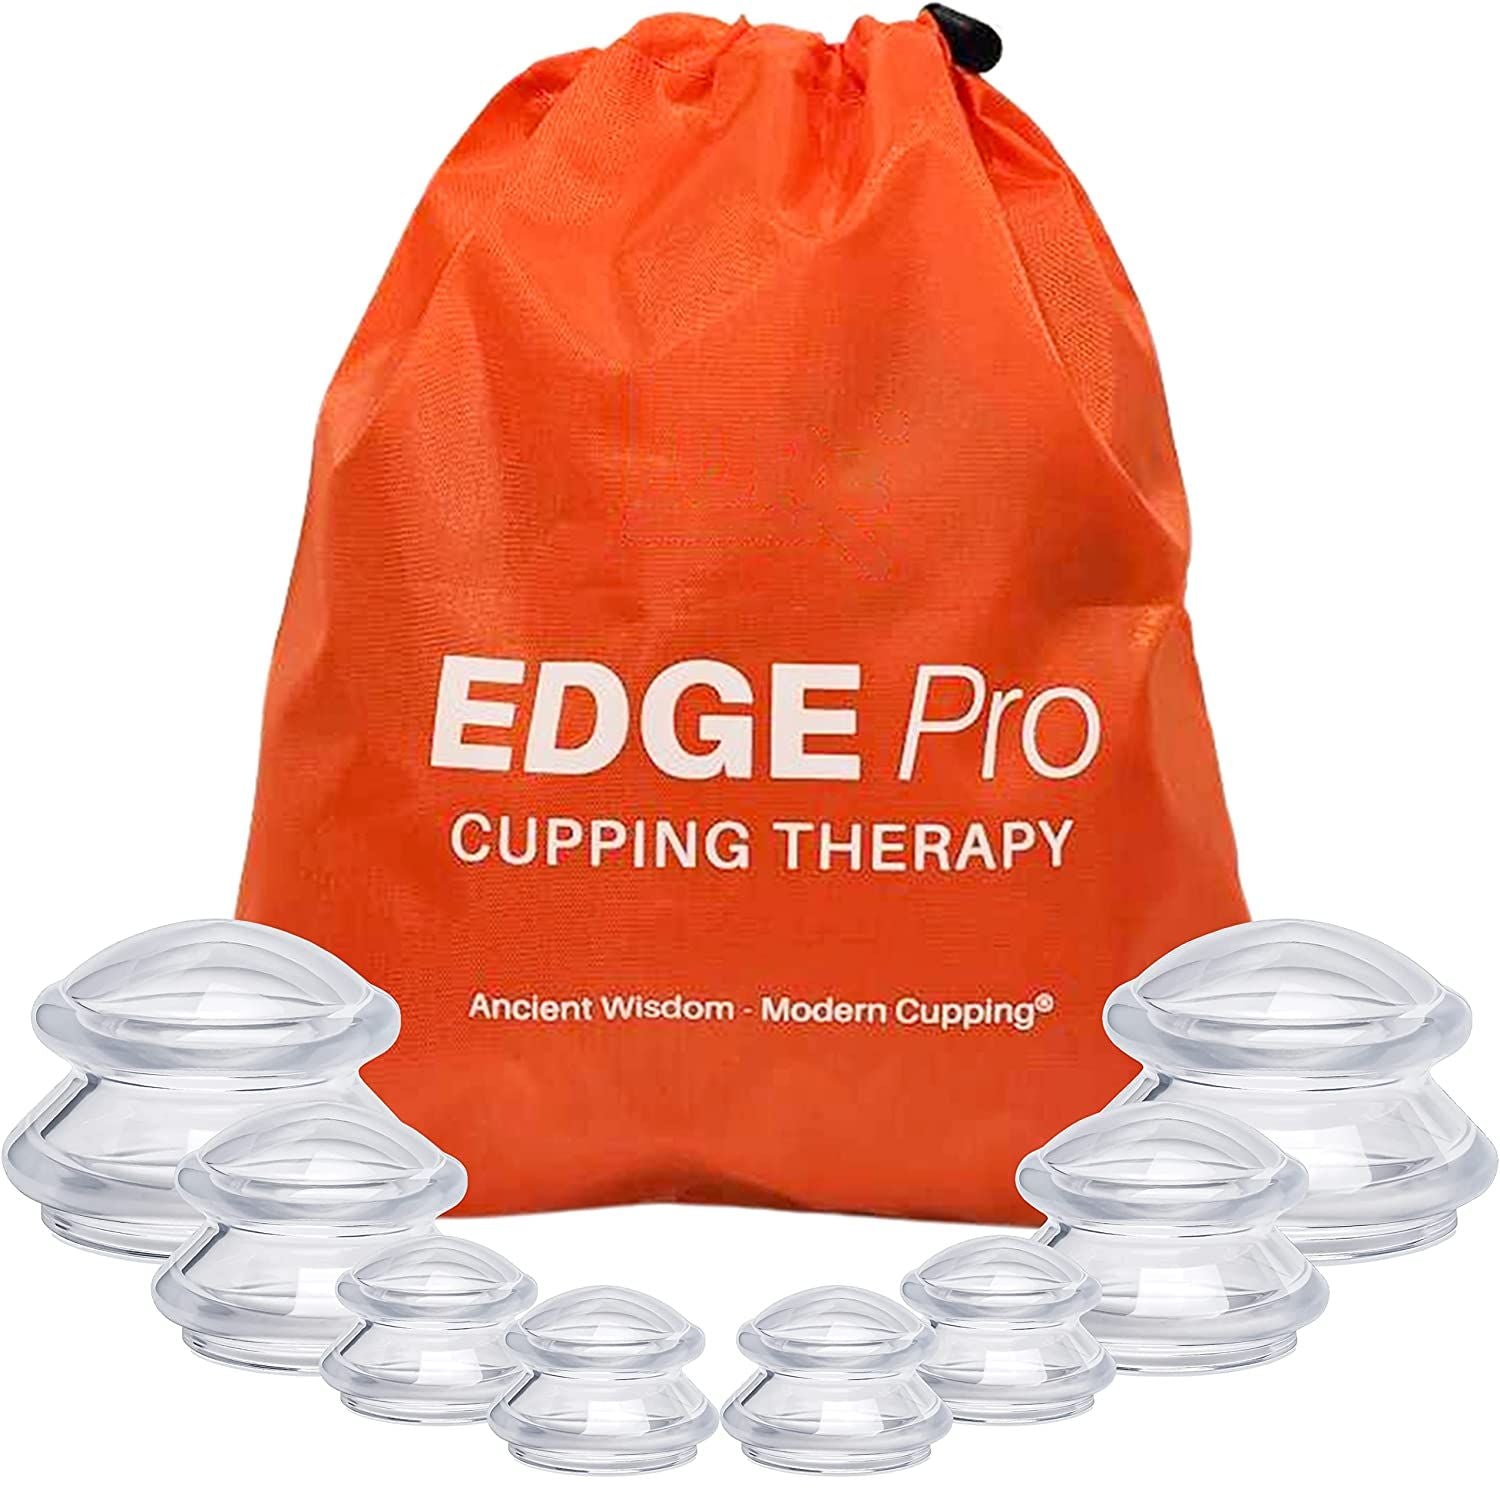 XTRM XNRGY™ Cupping Set